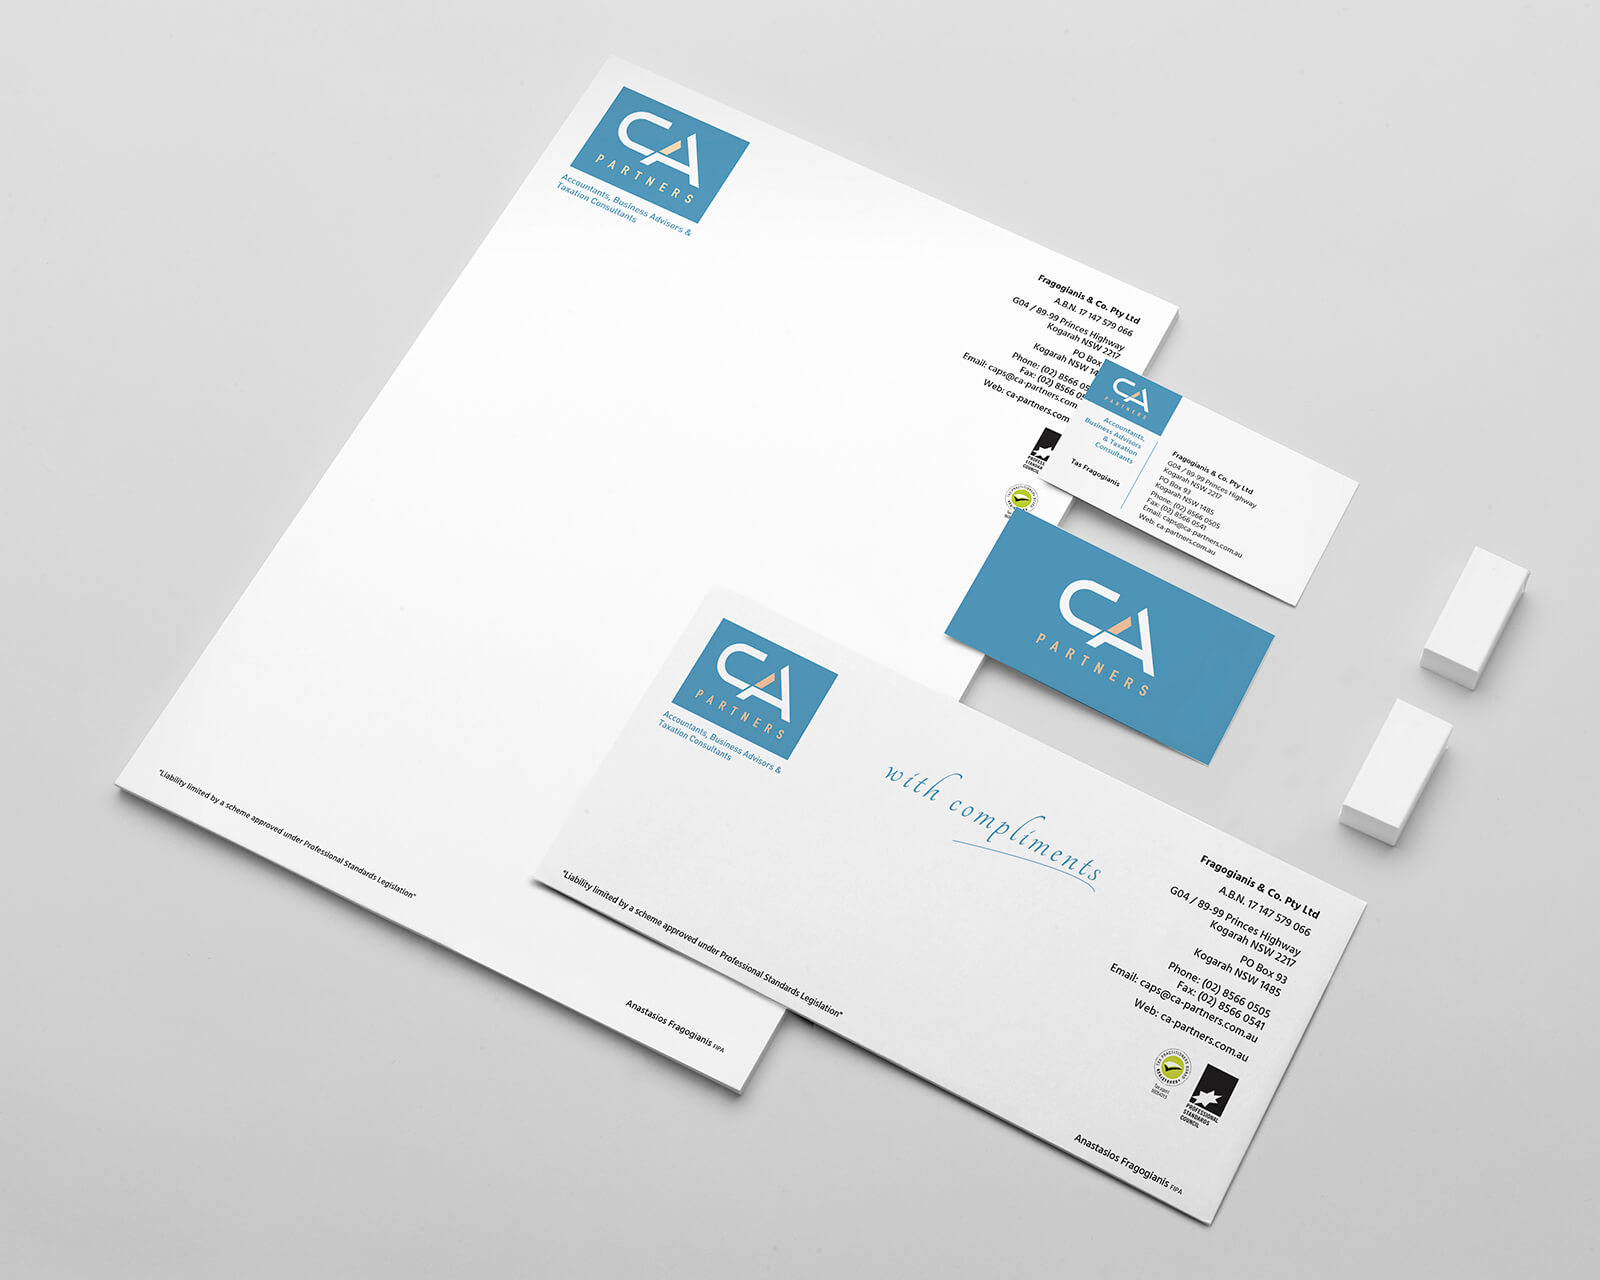 business cards, stationery graphic design service for lawyers tax accountants by freelance designer metrodesign bexley kogarah sydney